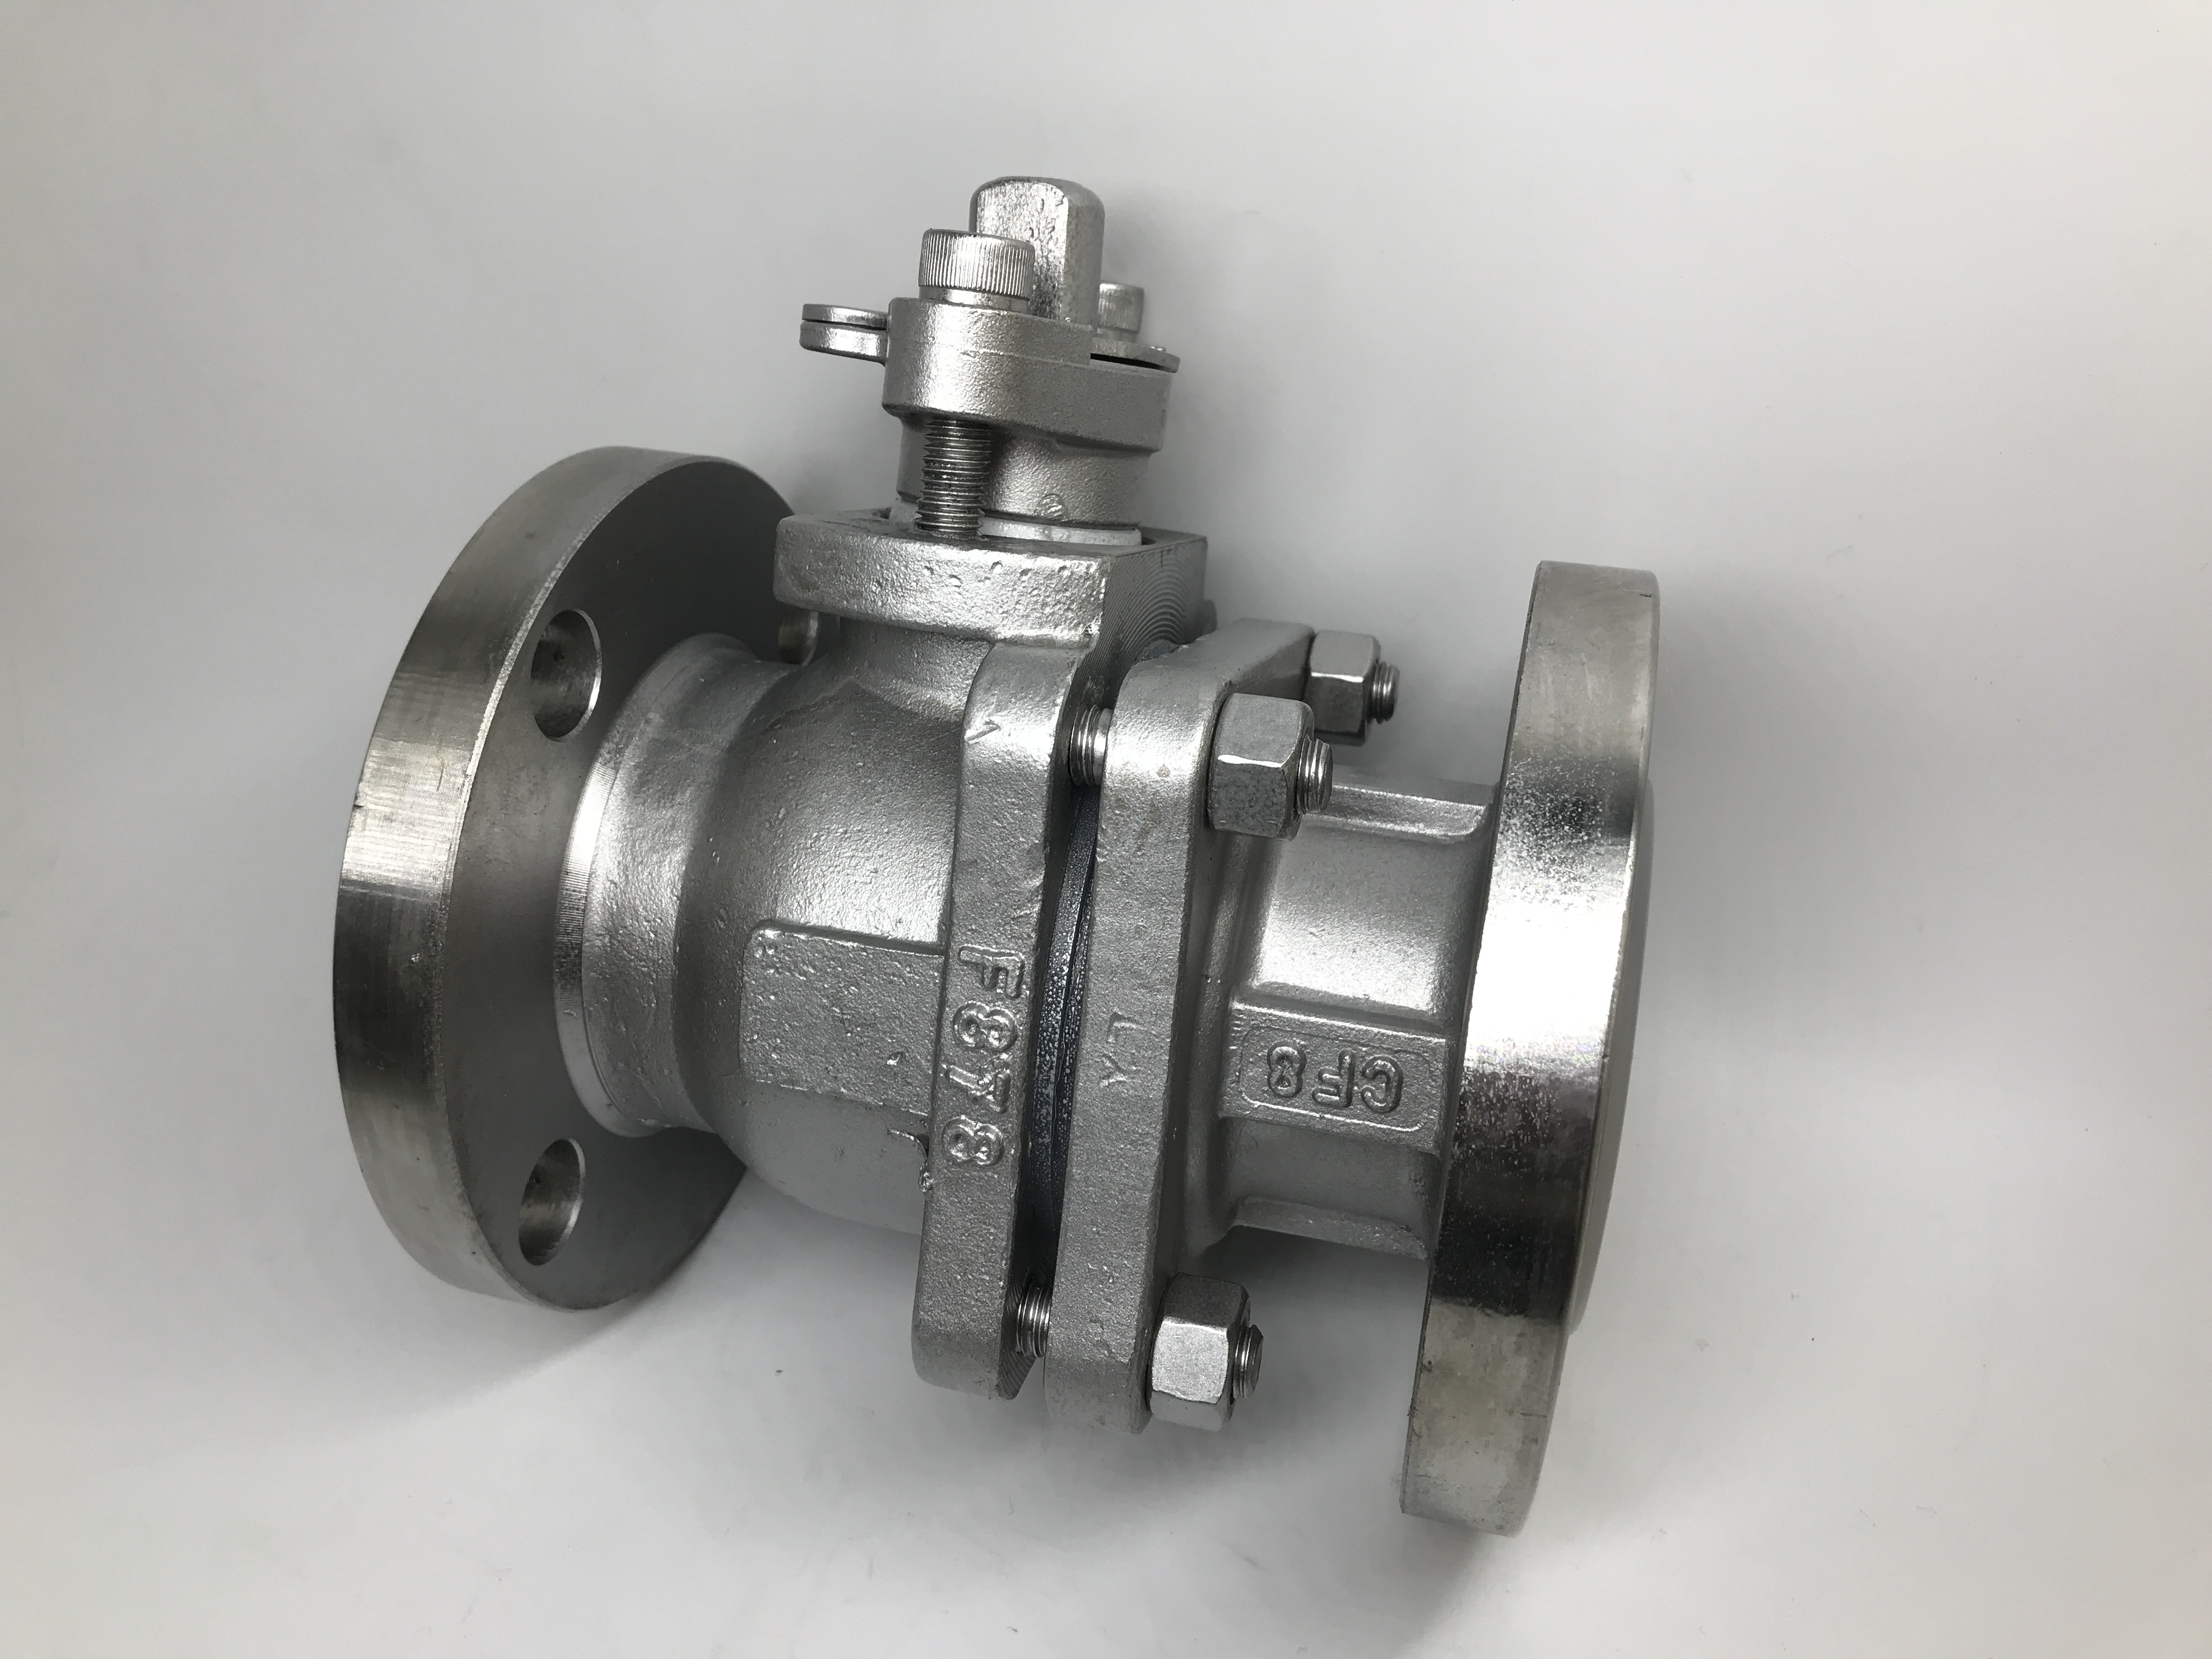 PFA Lined Flanged Ball Valve Stainless Steel